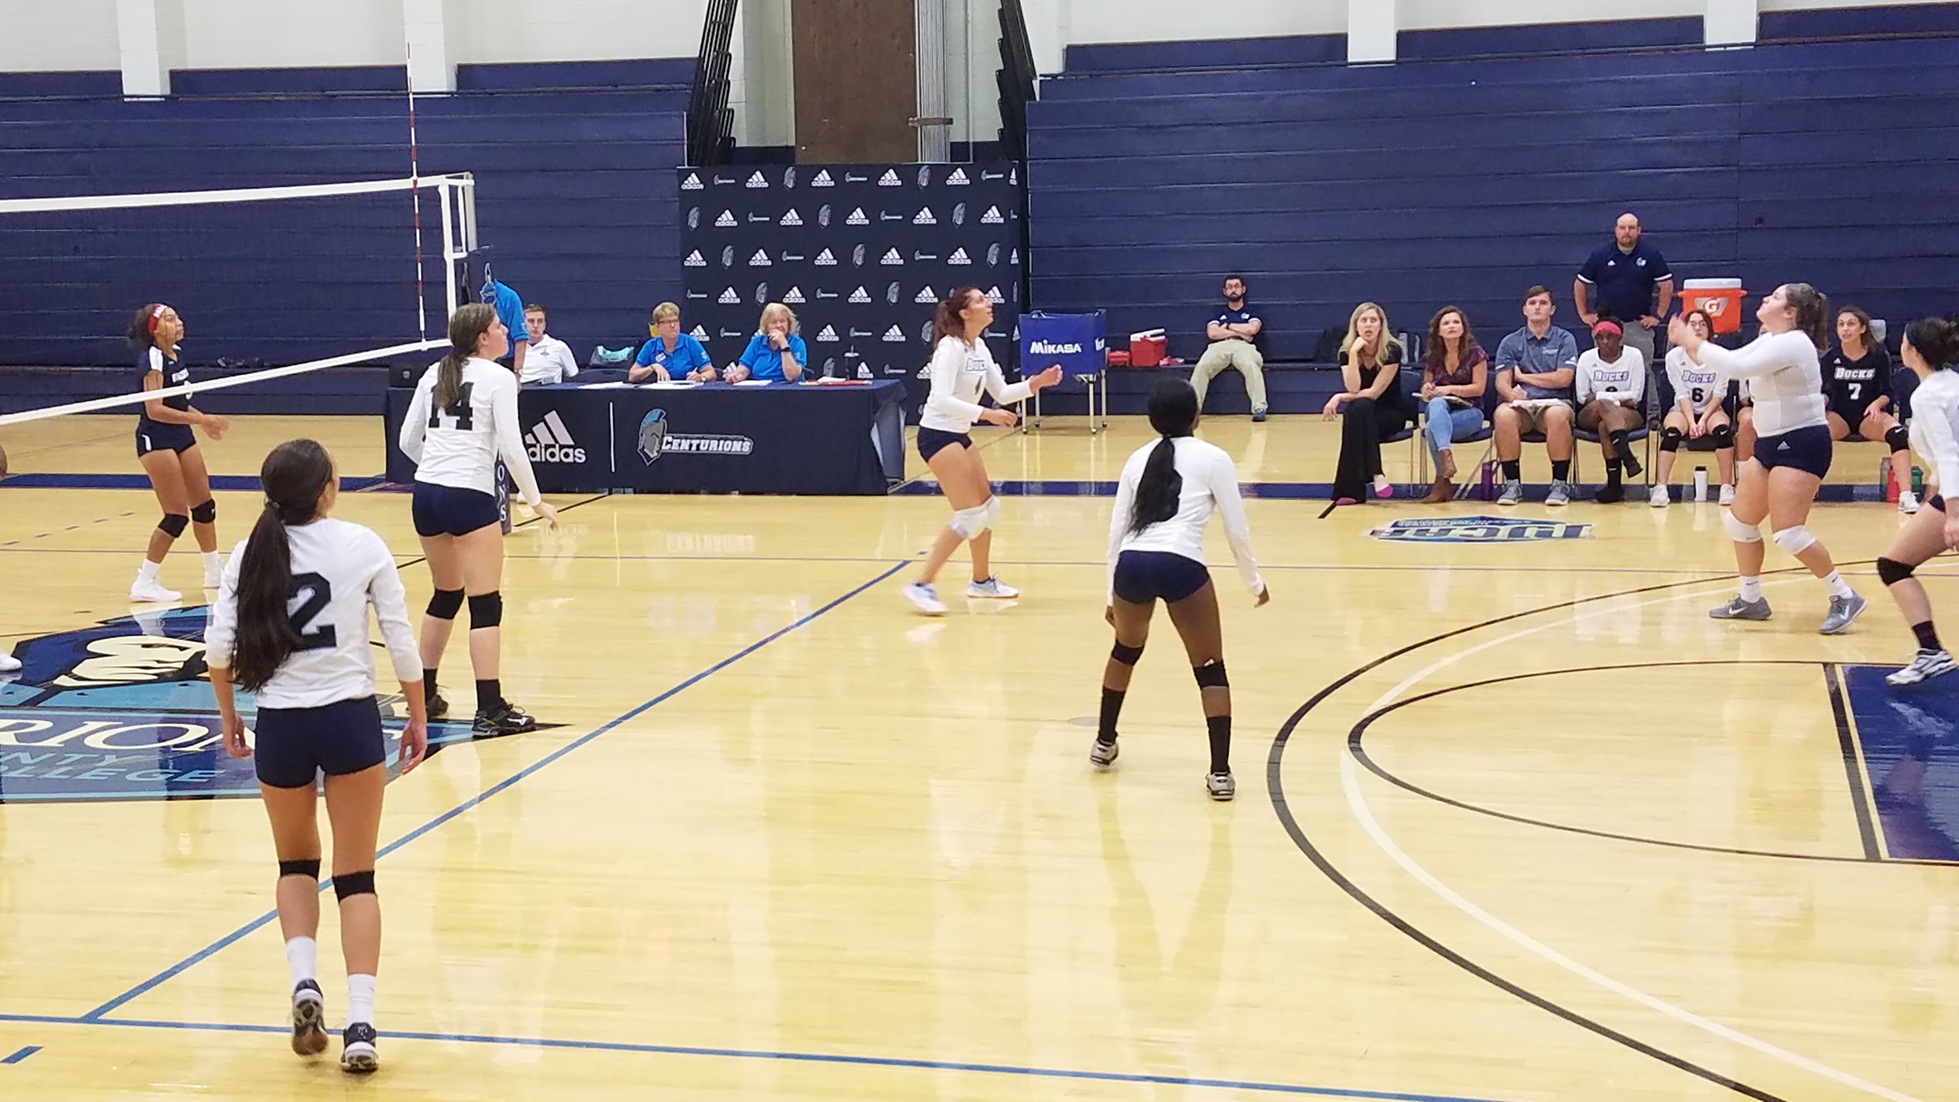 Women's Volleyball: Struggle with Gloucester